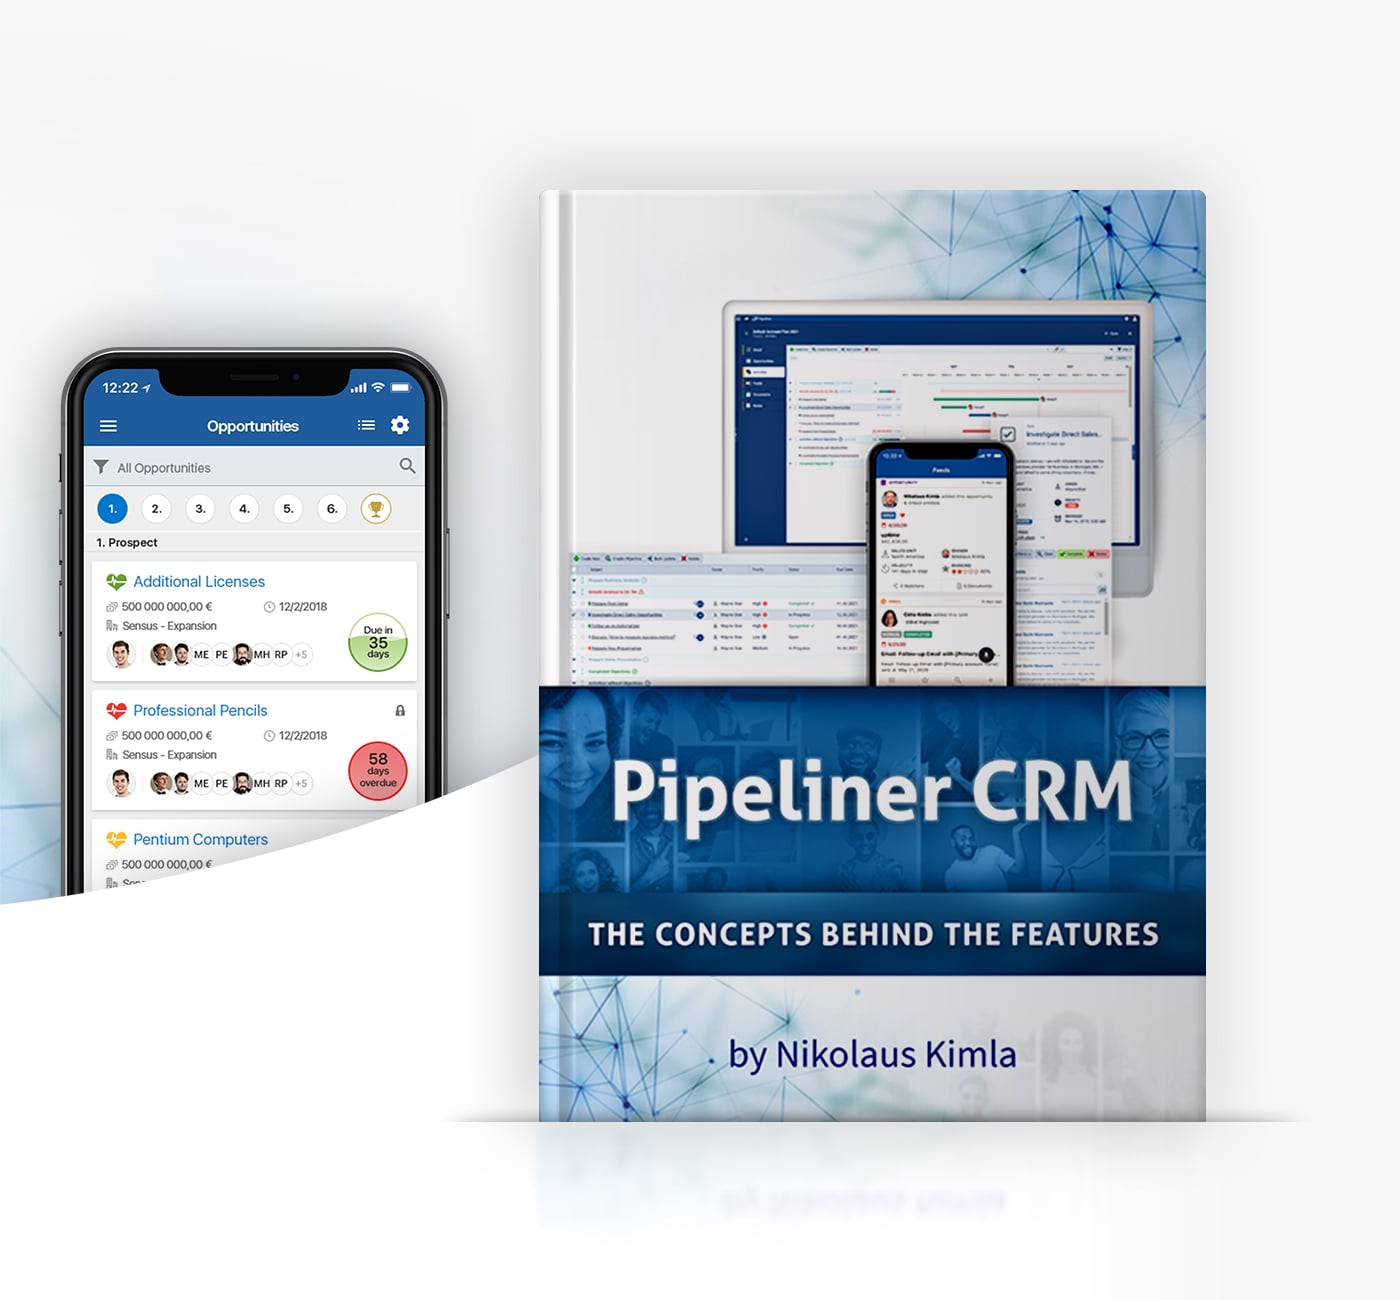 Pipeliner CRM - Concepts behind the CRM features